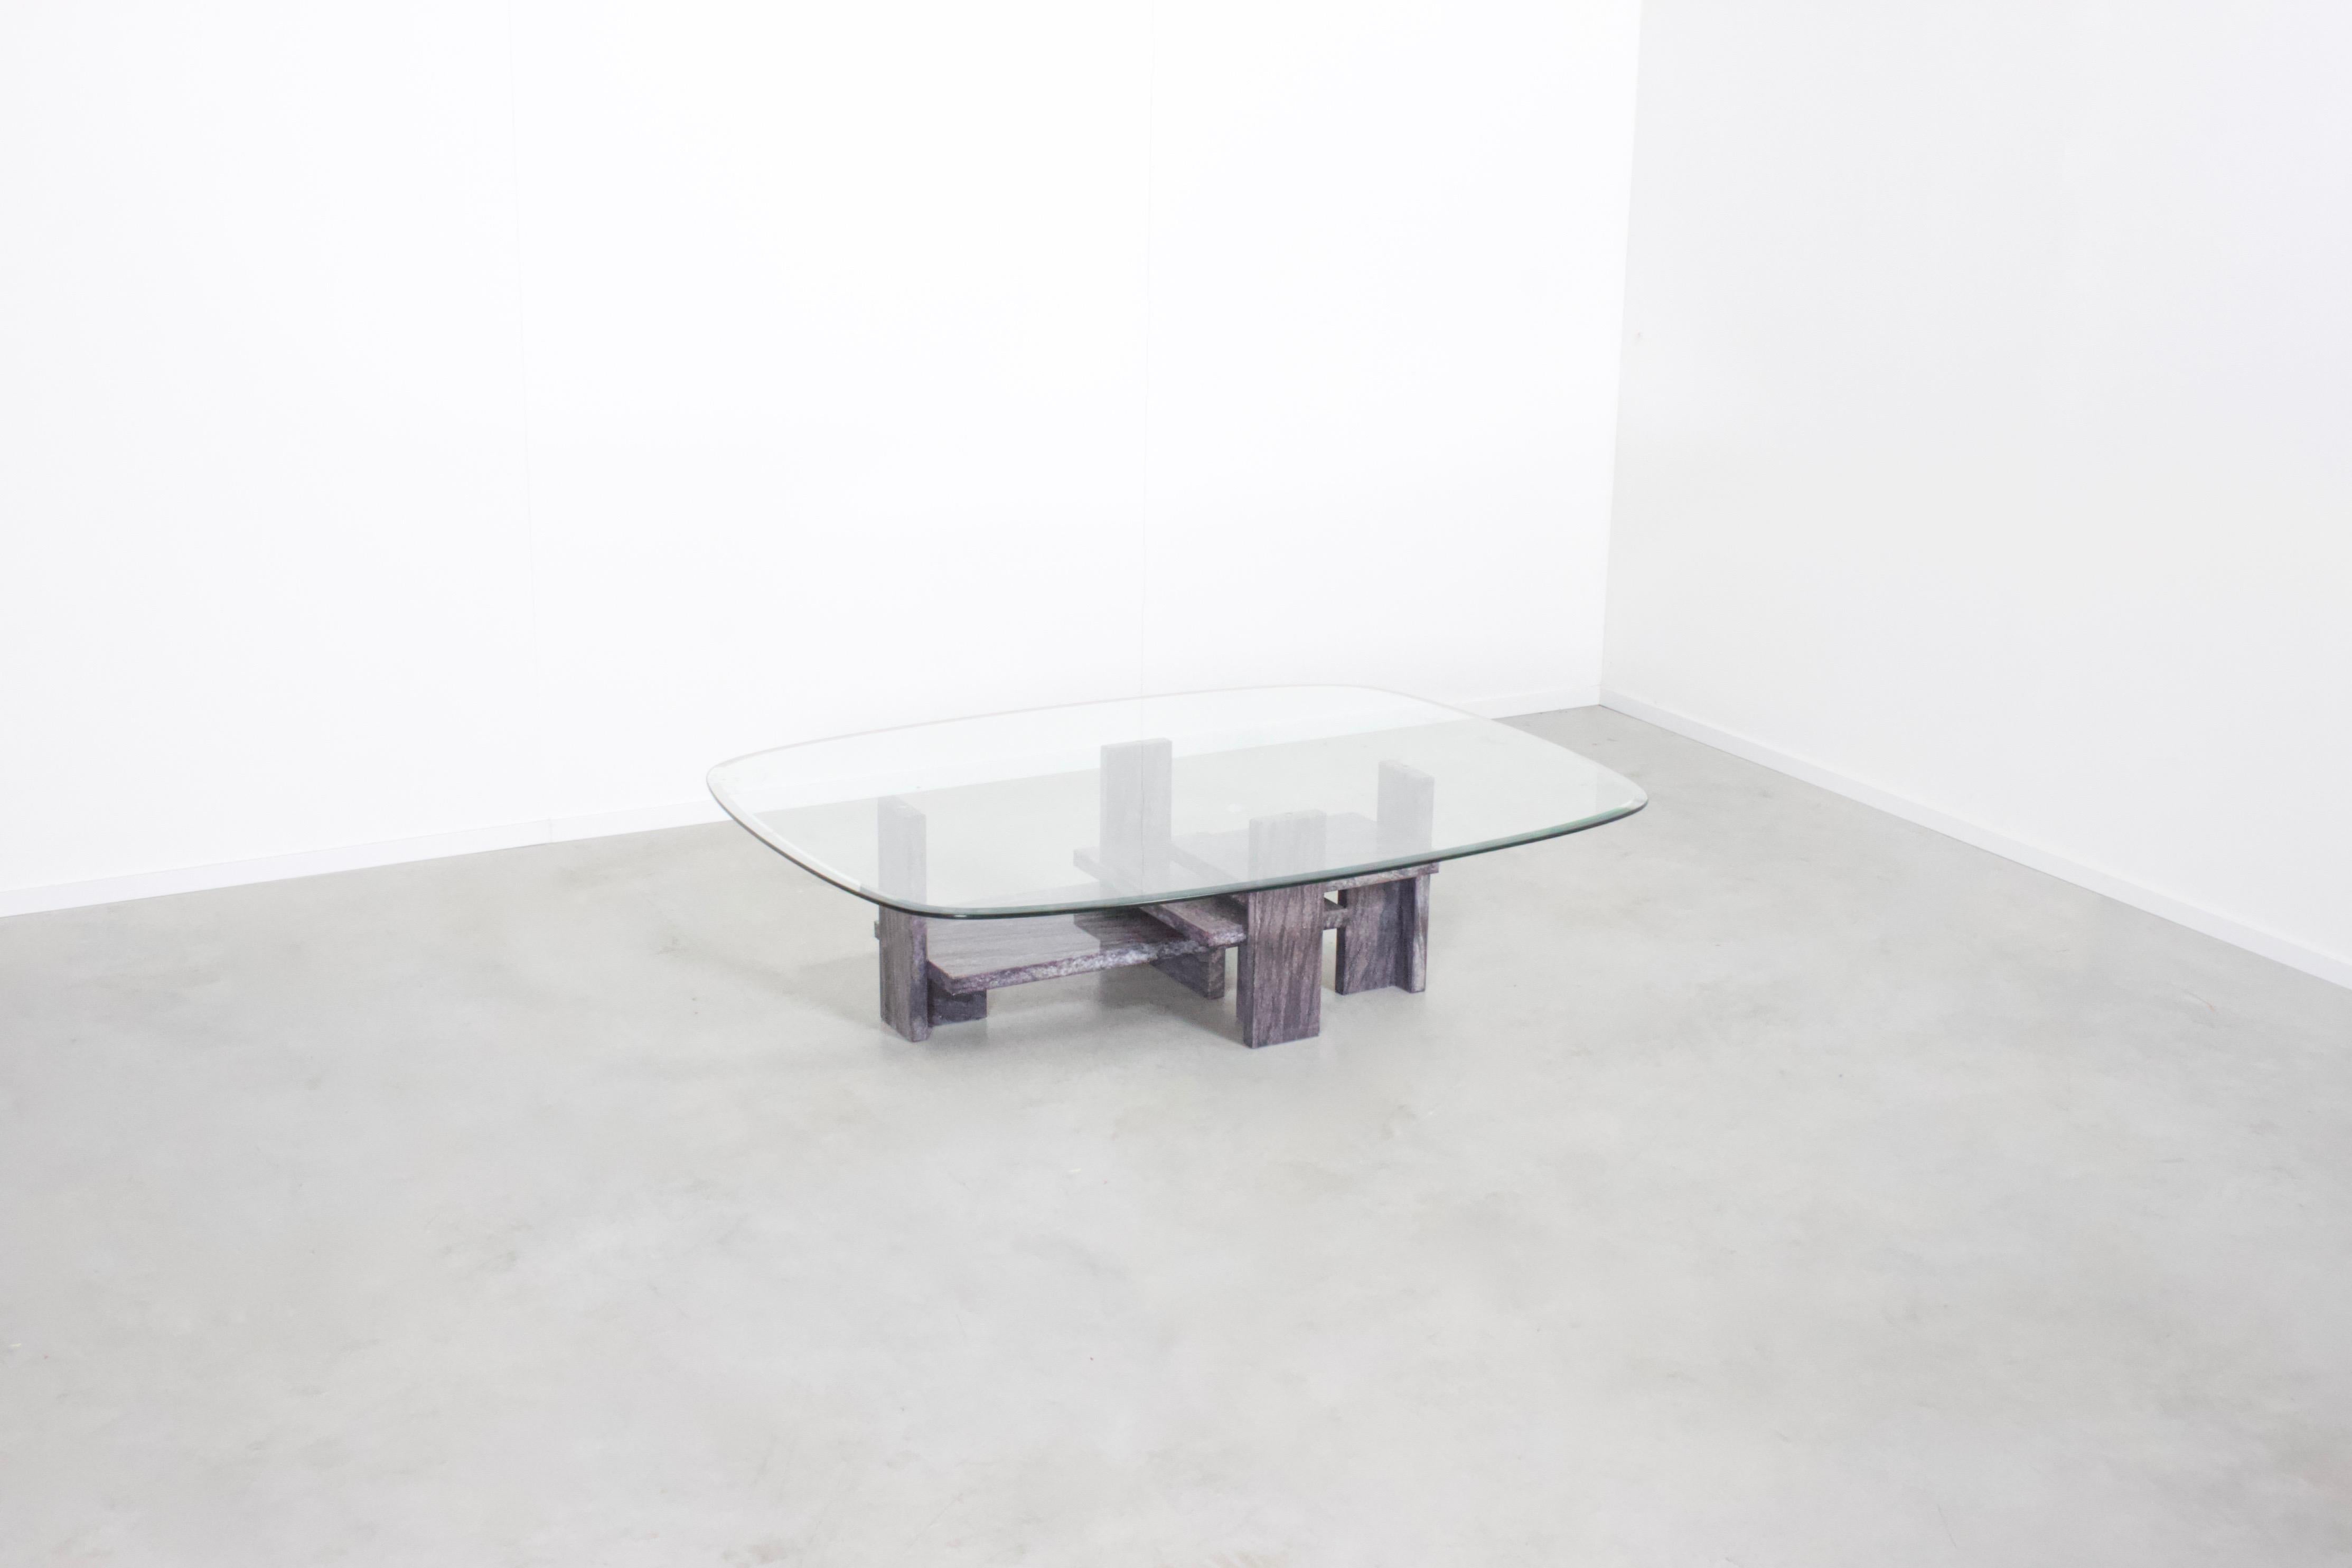 Sculptural coffee table by Willy Ballez in very good condition. 

Handmade in Belgium in the 1970s. 

The abstract base is made from solid marble in a Grey and Purple color. 

The oval top is made of glass and has a facet rim. 

We offer a variety